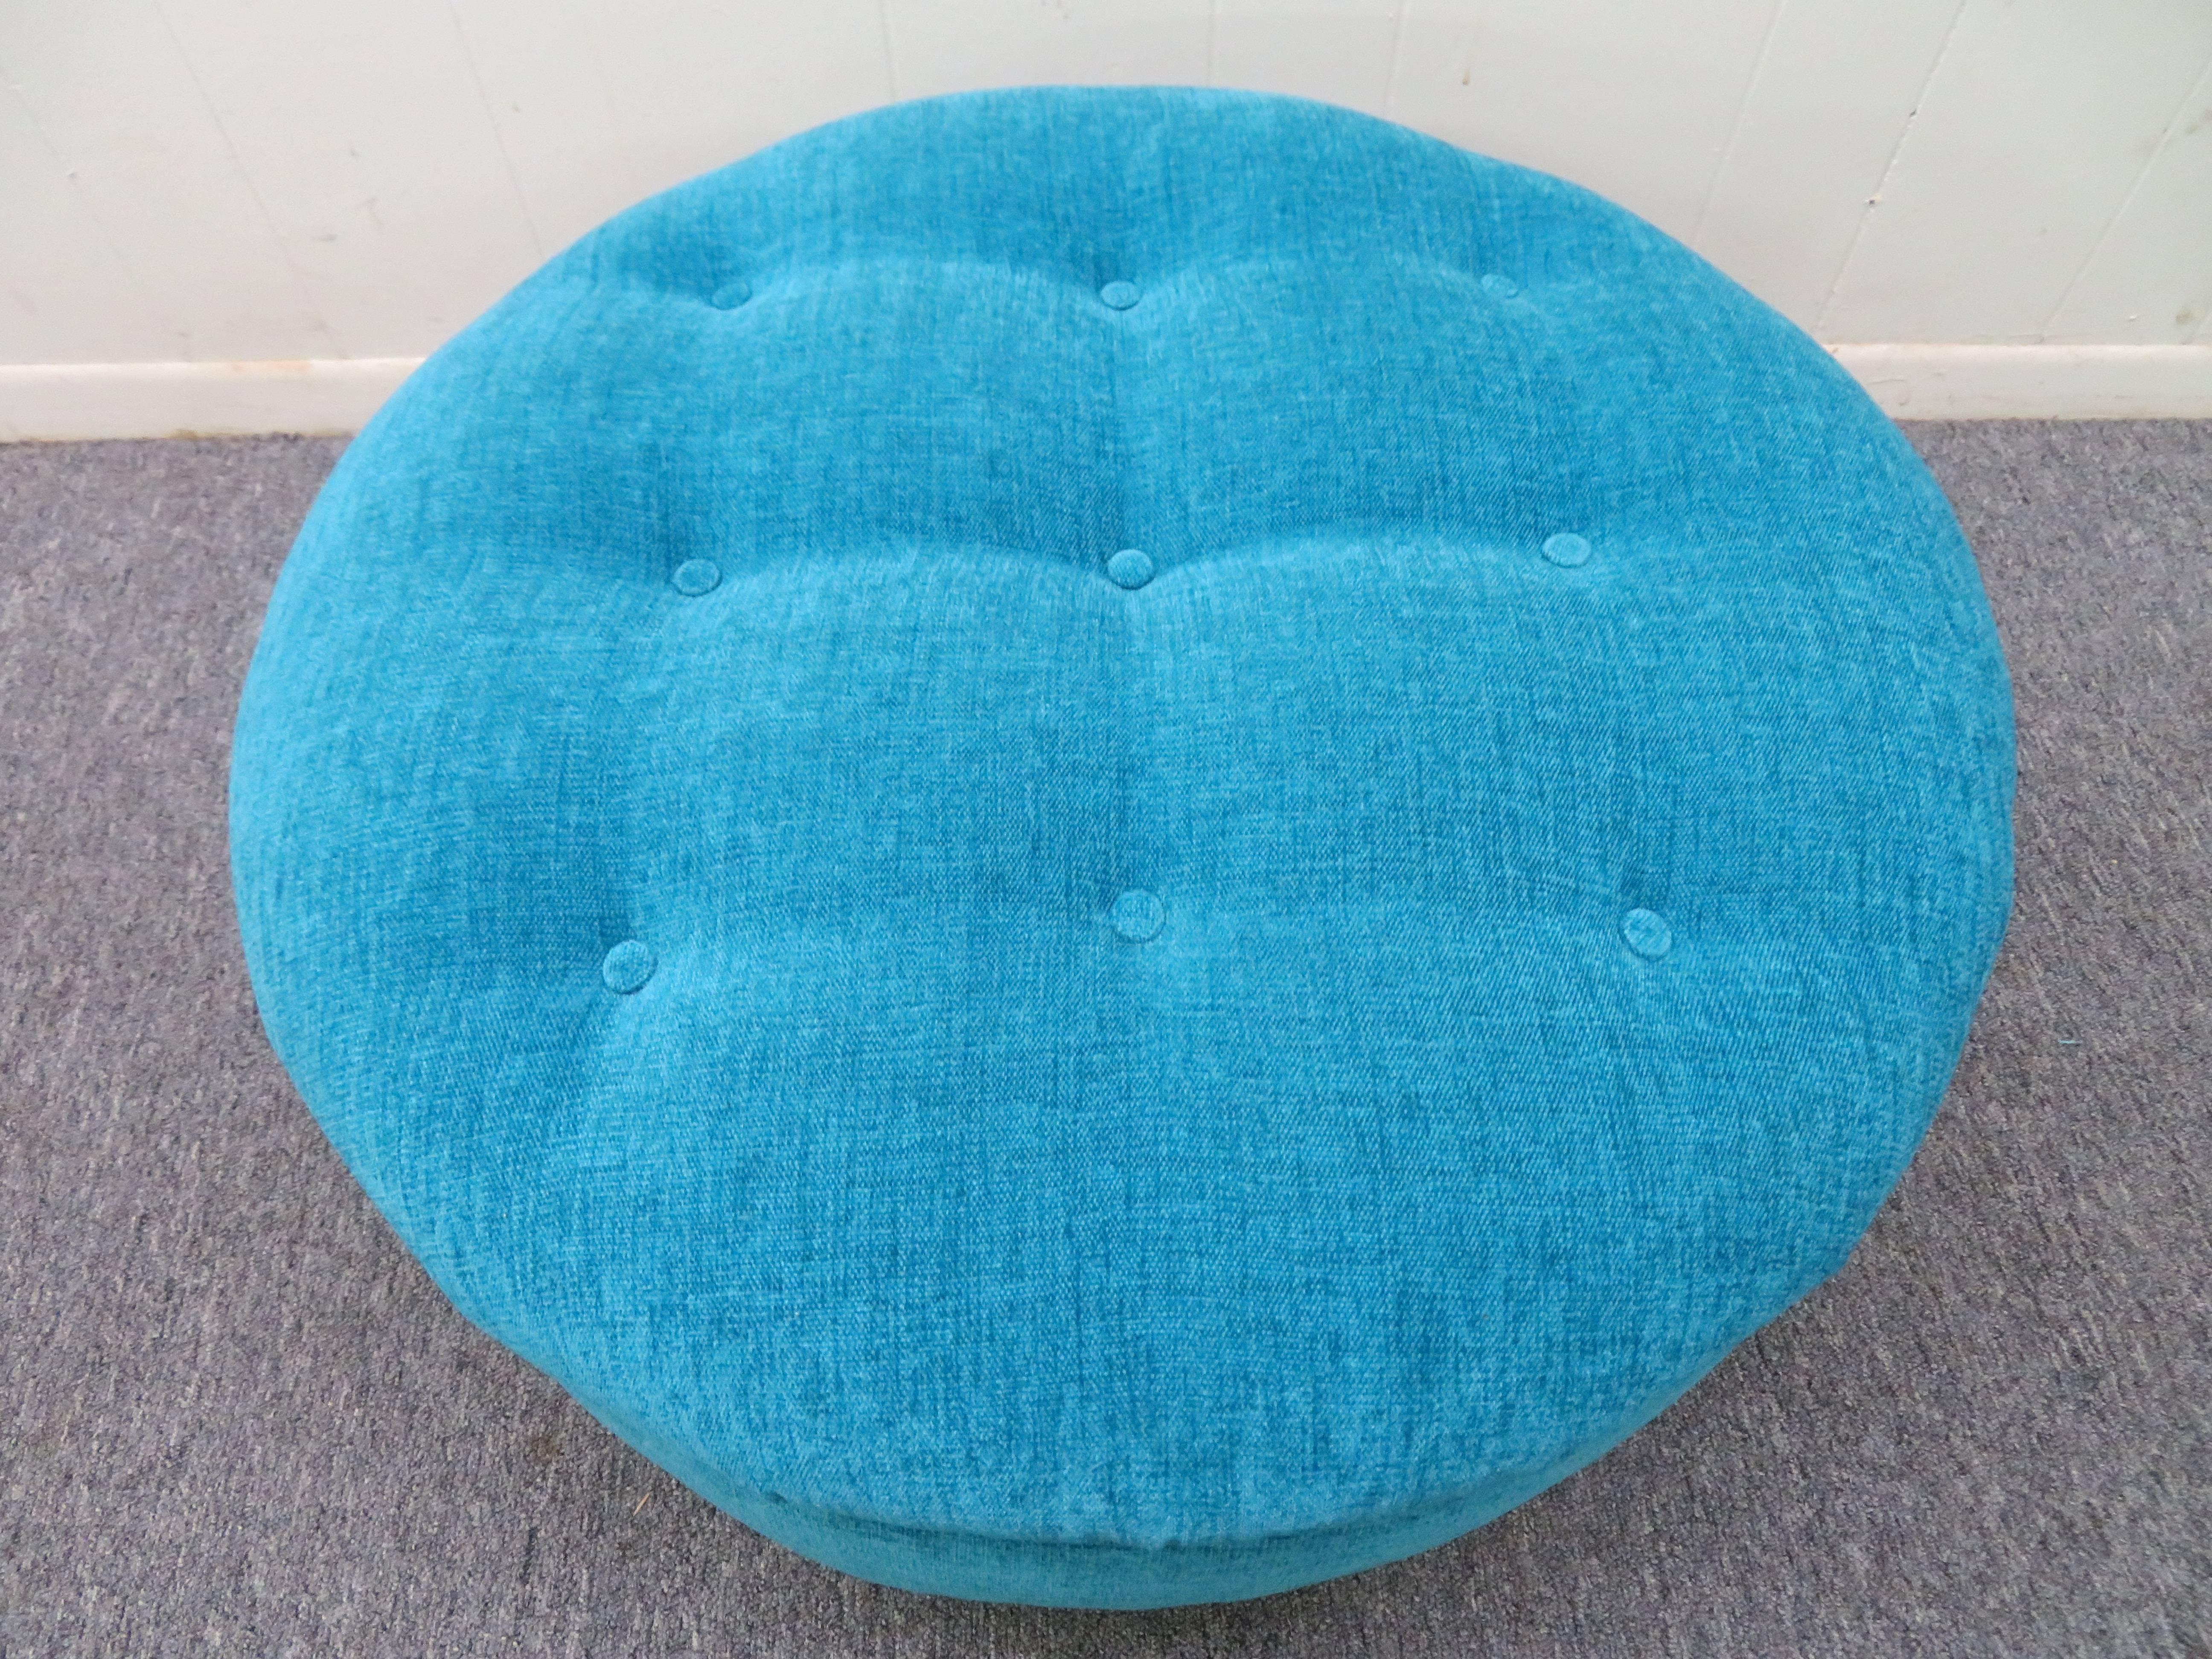 Excellent newly re-upholstered round tufted pouf ottoman. This piece has been totally restored with new high end fabric and new foam.